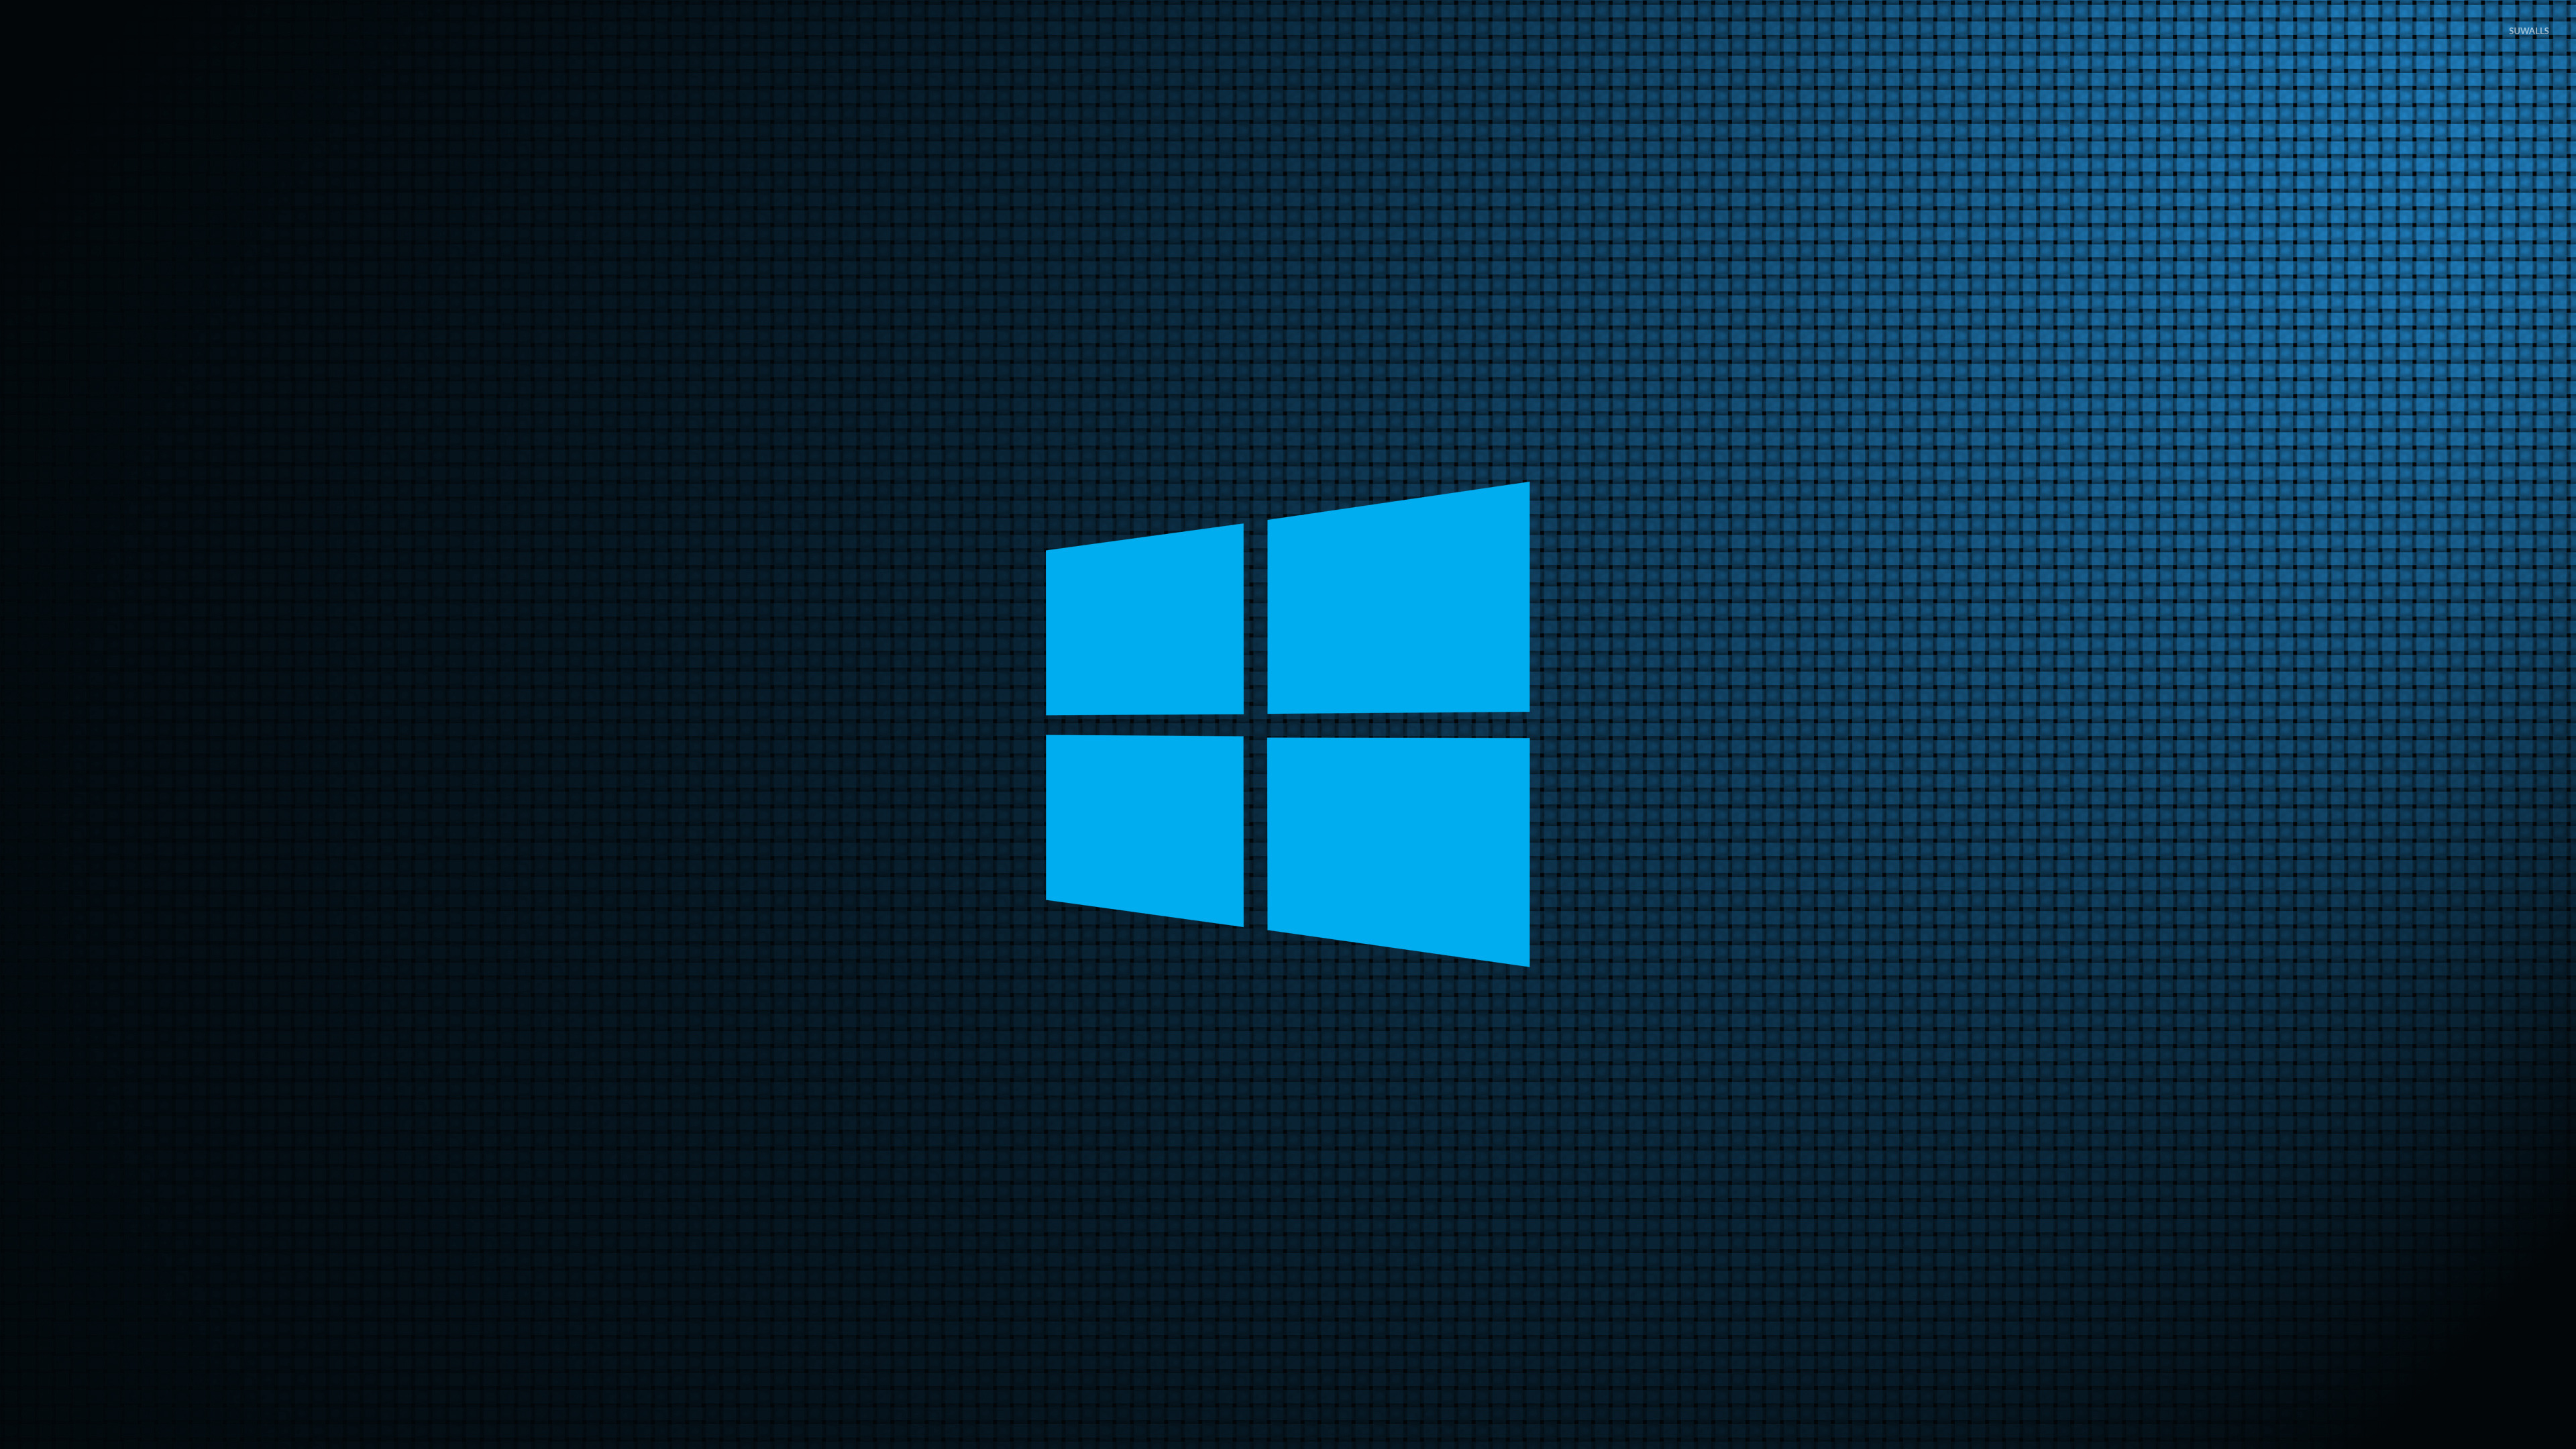 Windows 10 on weave simple logo wallpaper - Computer wallpapers - #46829